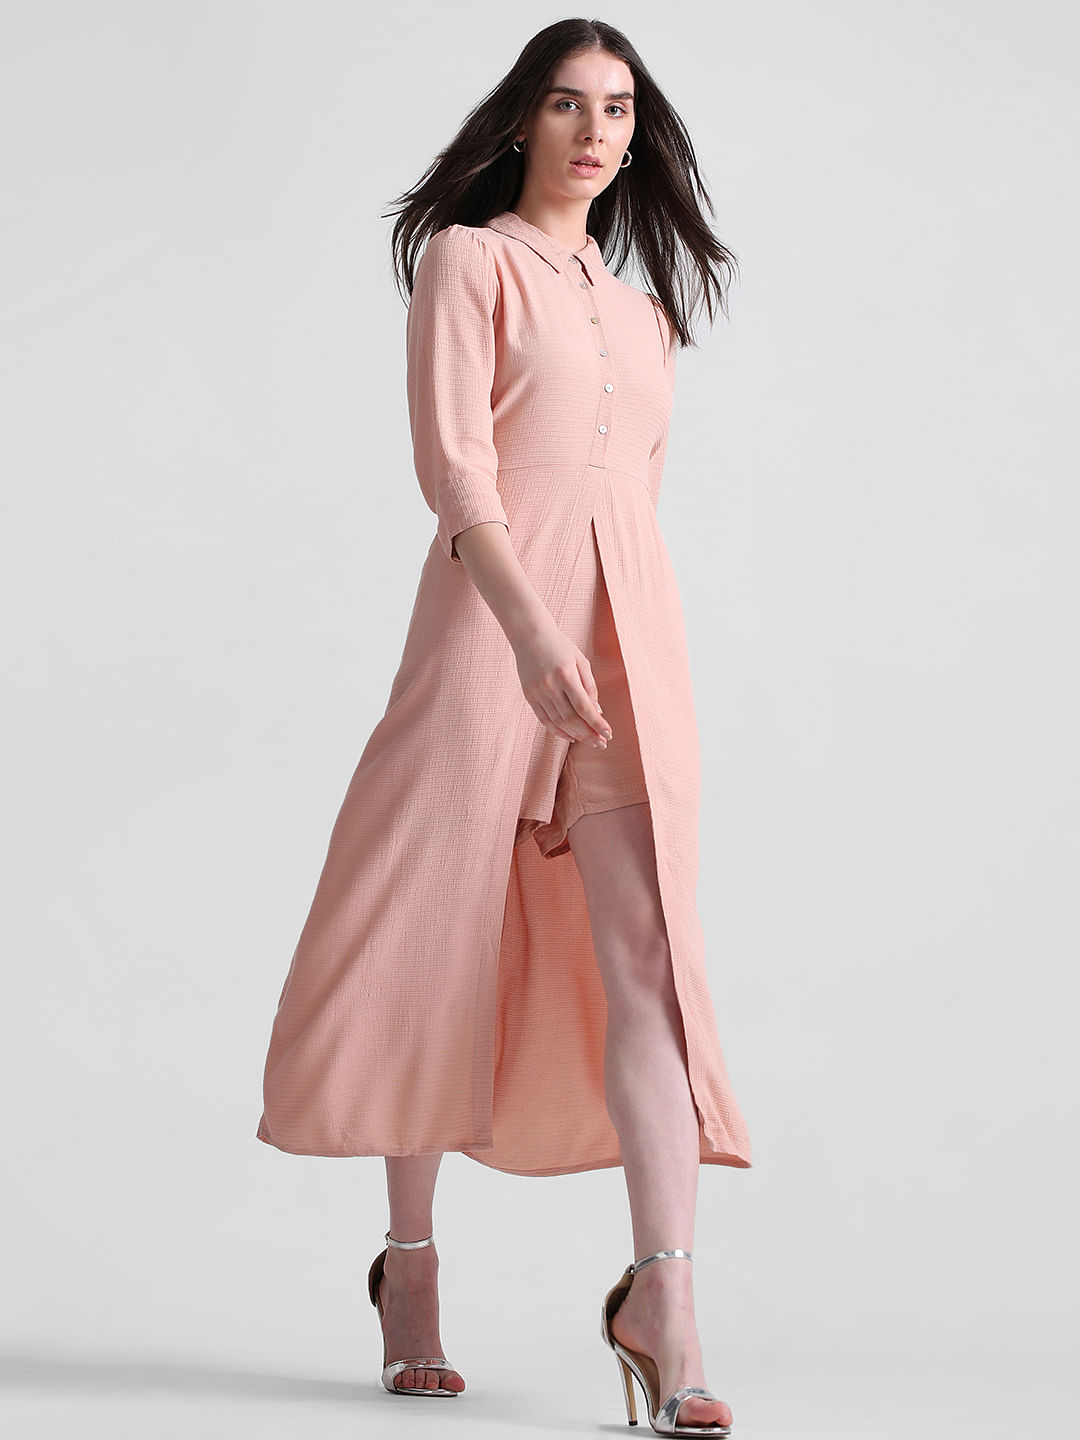 Women maxi shirt Dress with Belt - beforeothers.in